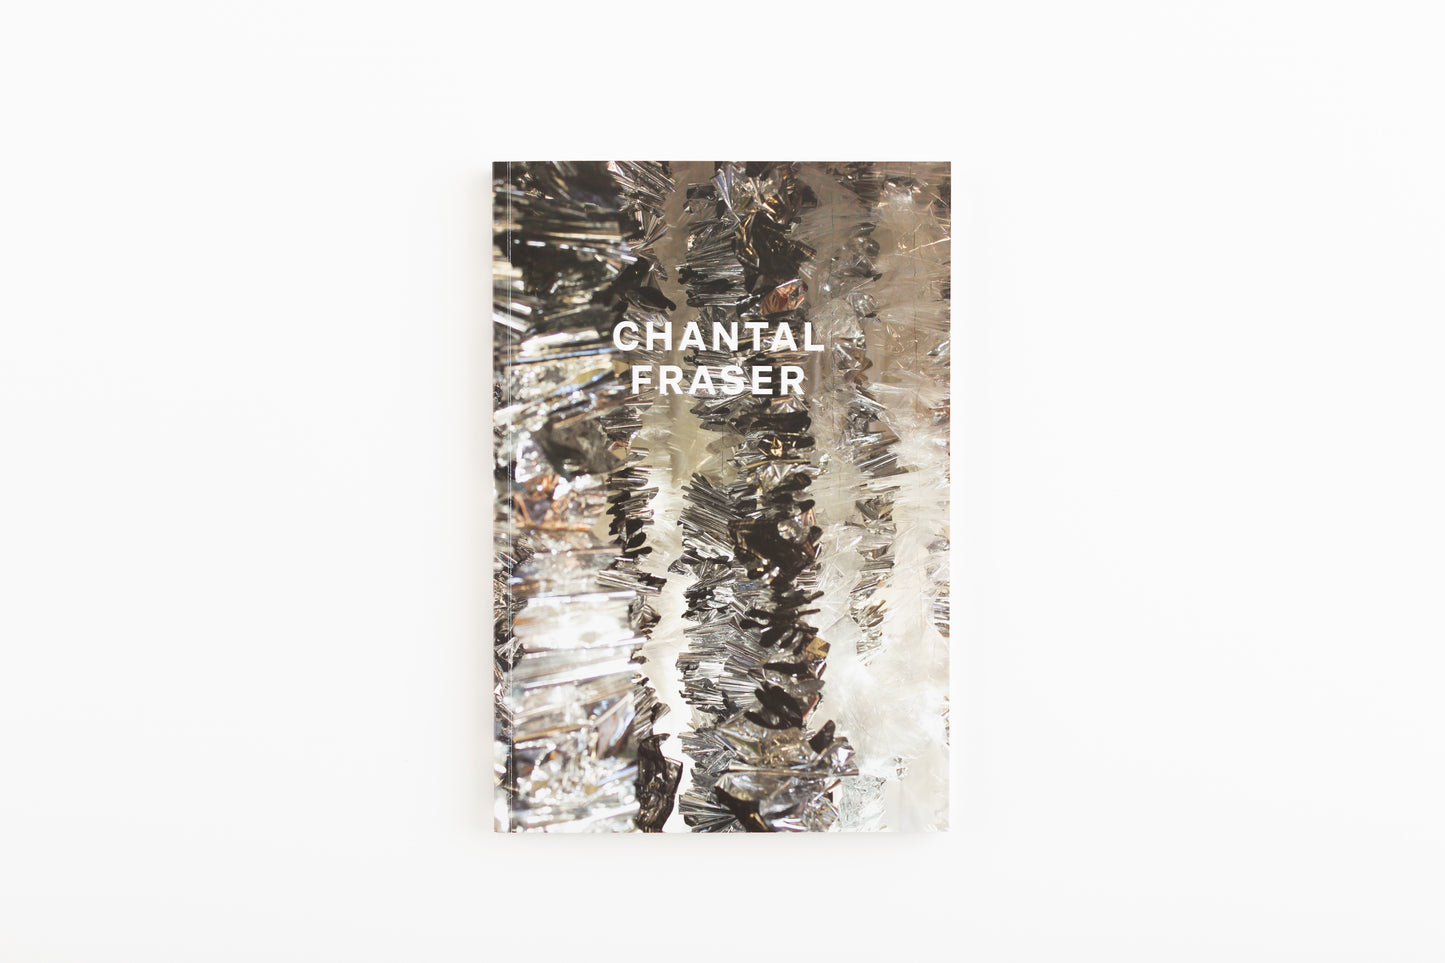 CHANTAL FRASER | 'The Ascended' | Exhibition Catalogue